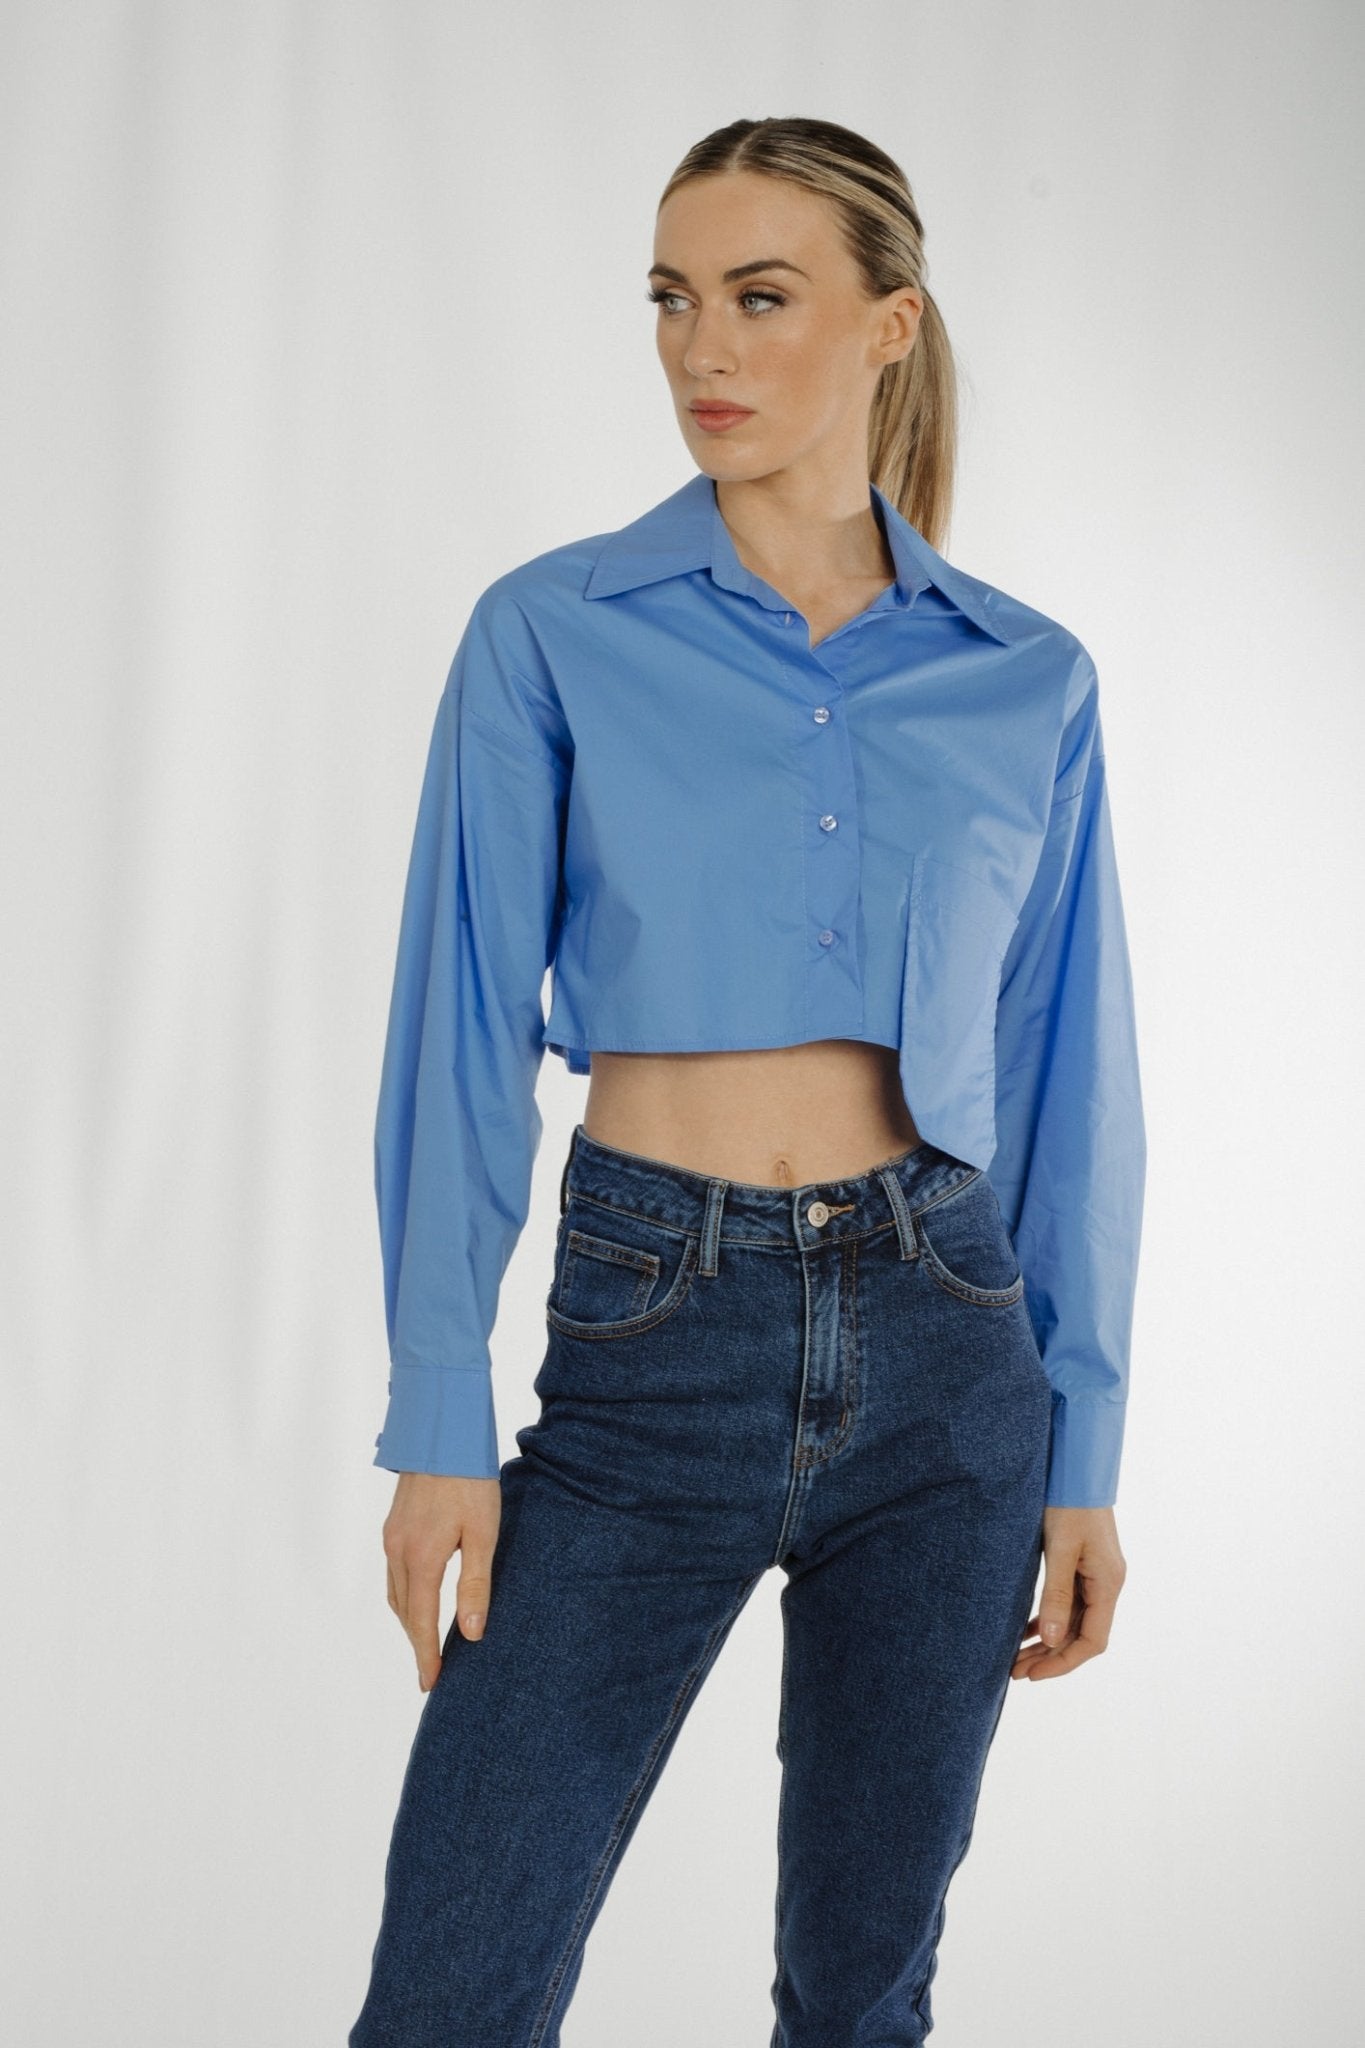 Lexi Cropped Shirt In Blue - The Walk in Wardrobe